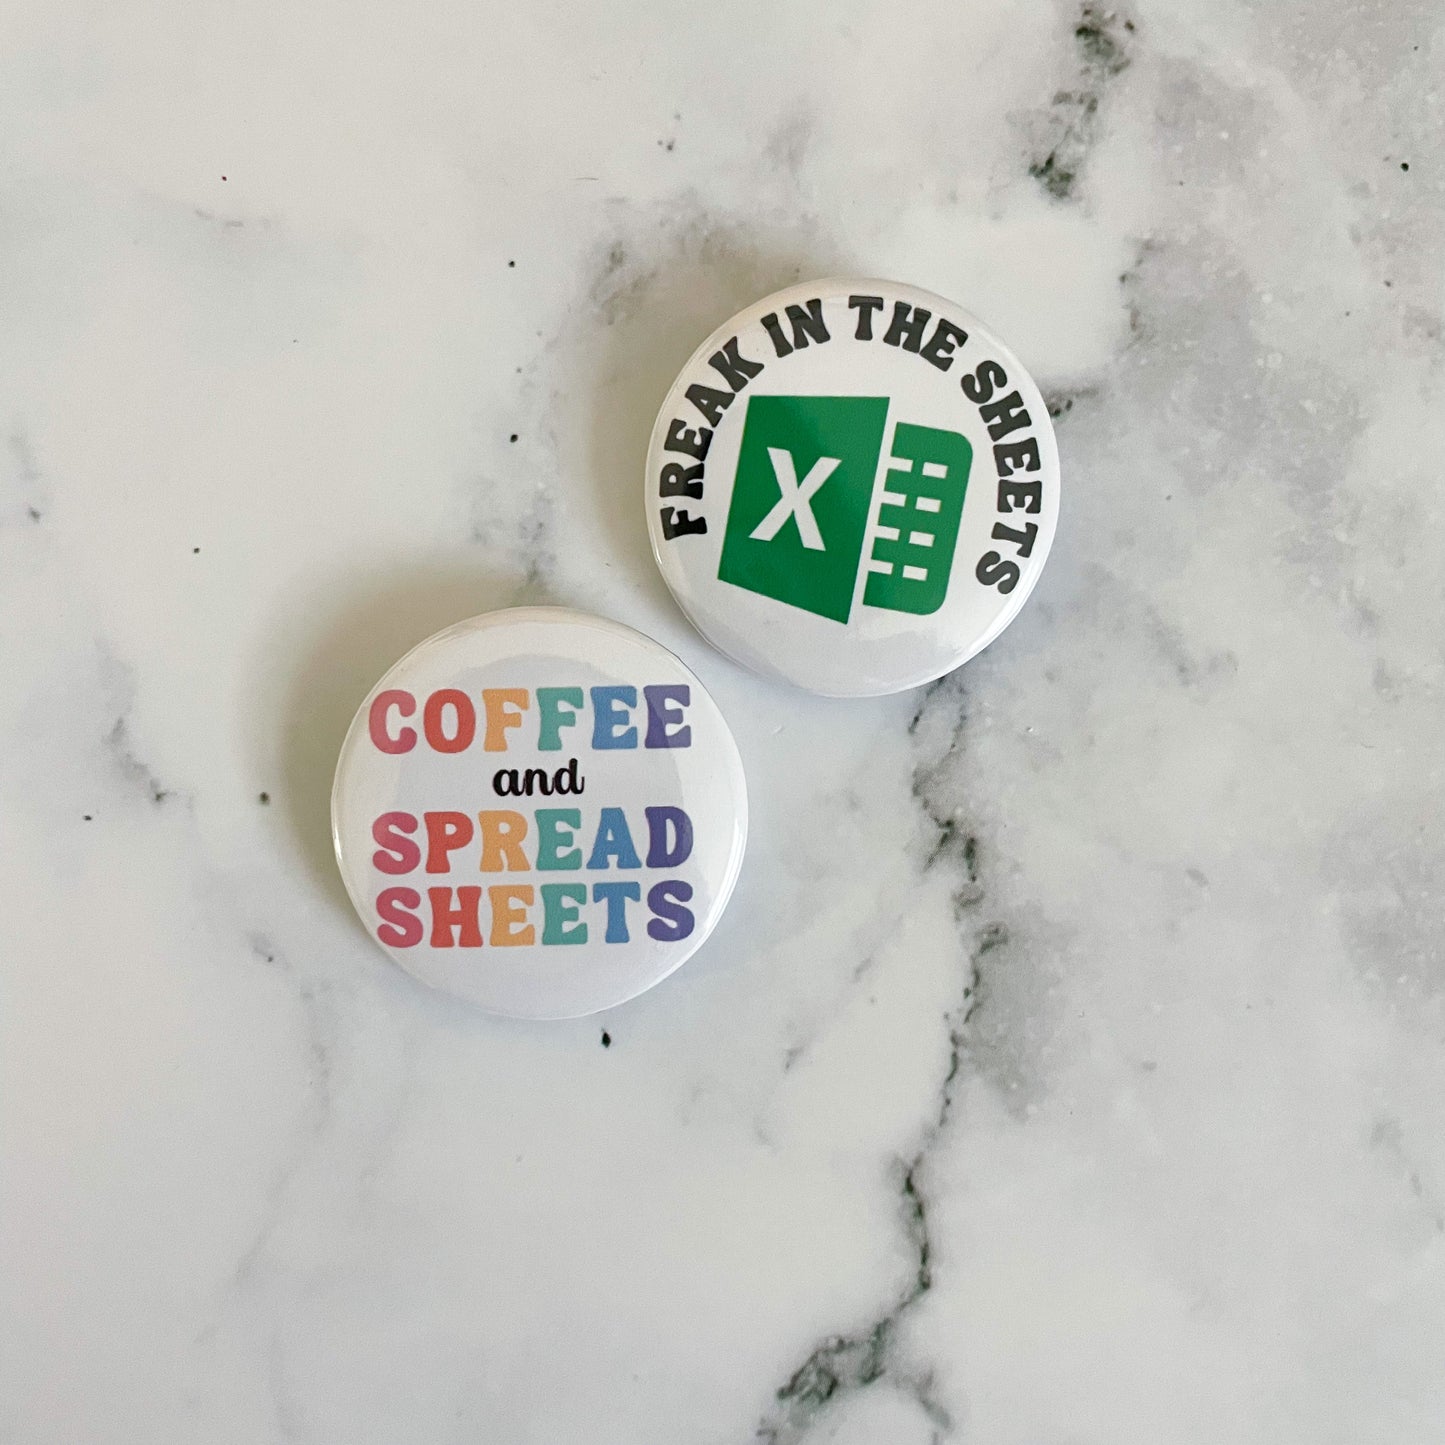 Freak In The Sheets Excel Button / Badge (Buy 4 Get 1 FREE)